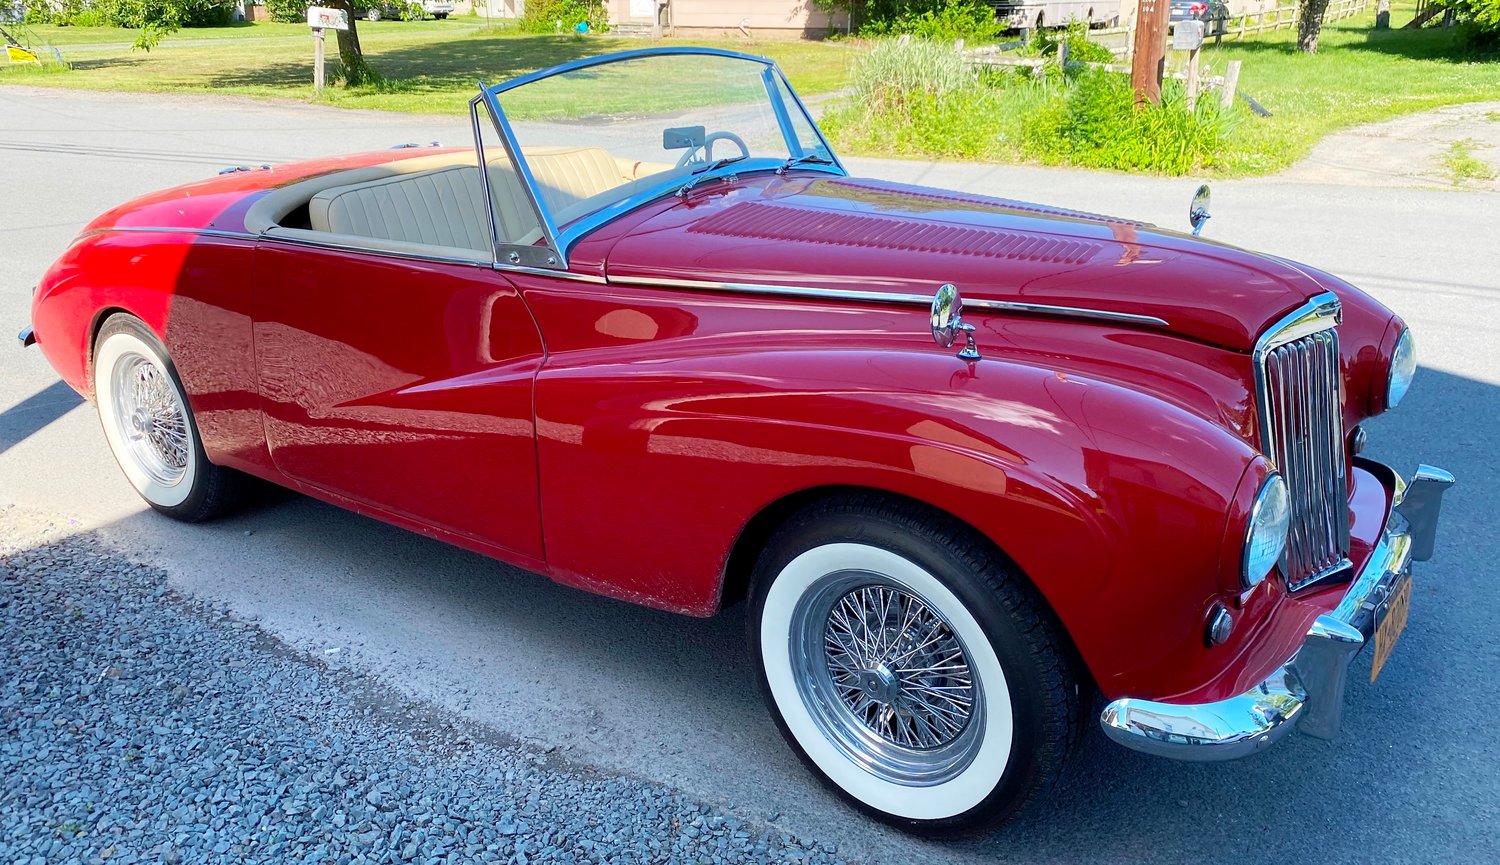 A 1955 Sunbeam Alpine MK III, one of only 21 in the world, will be on display at the event.